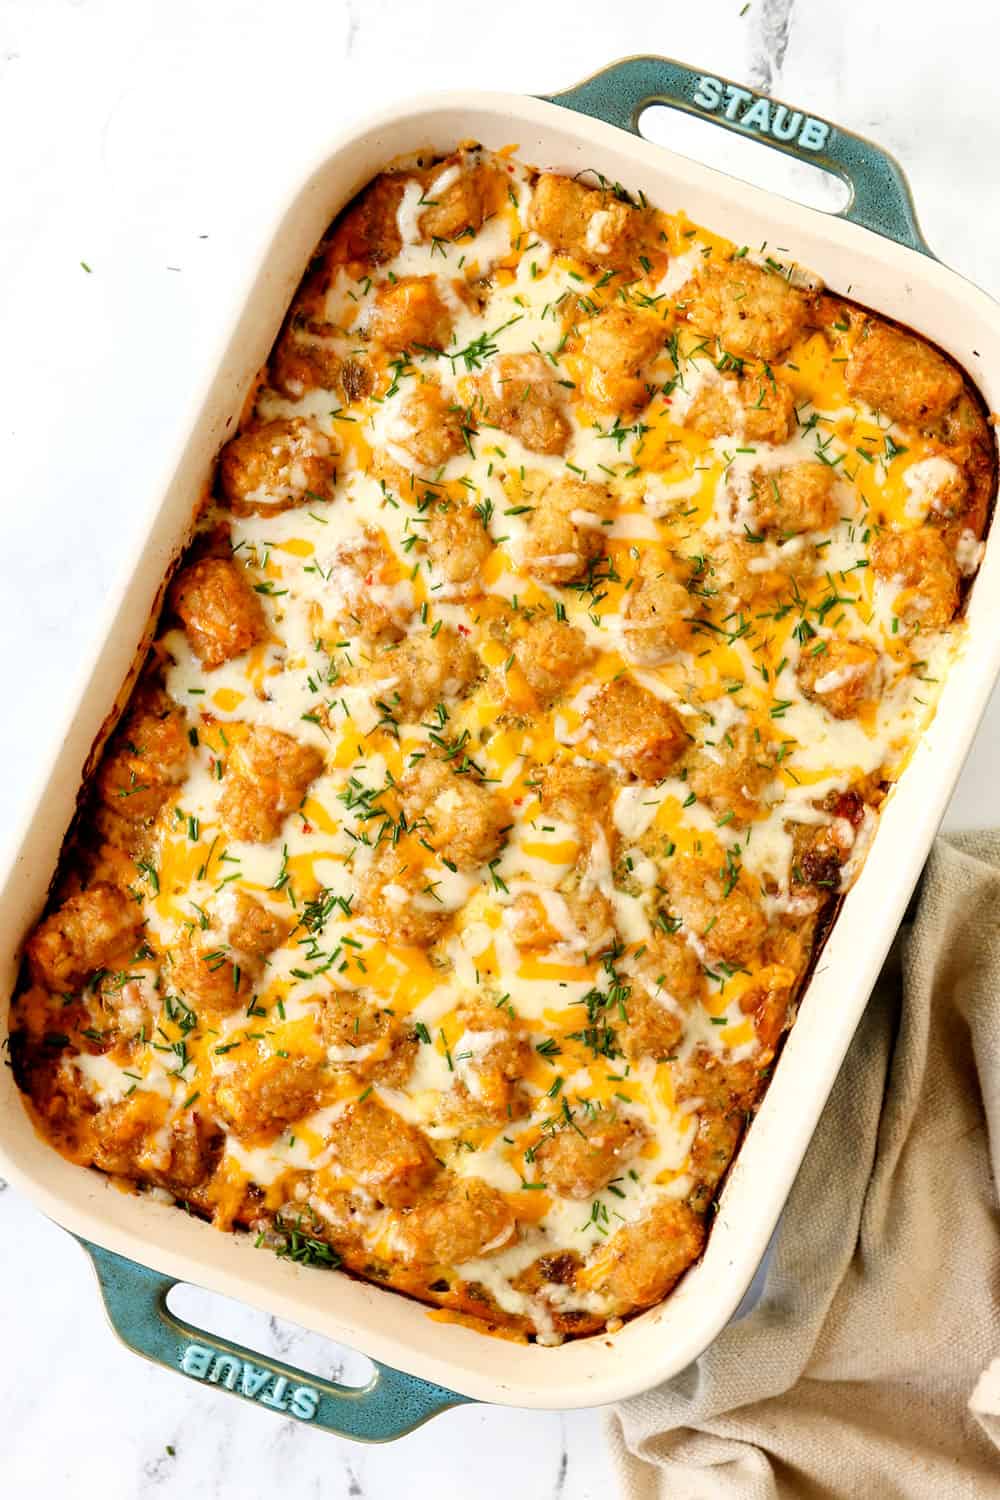 top view of tater tot casserole in a 9x13 baking dish